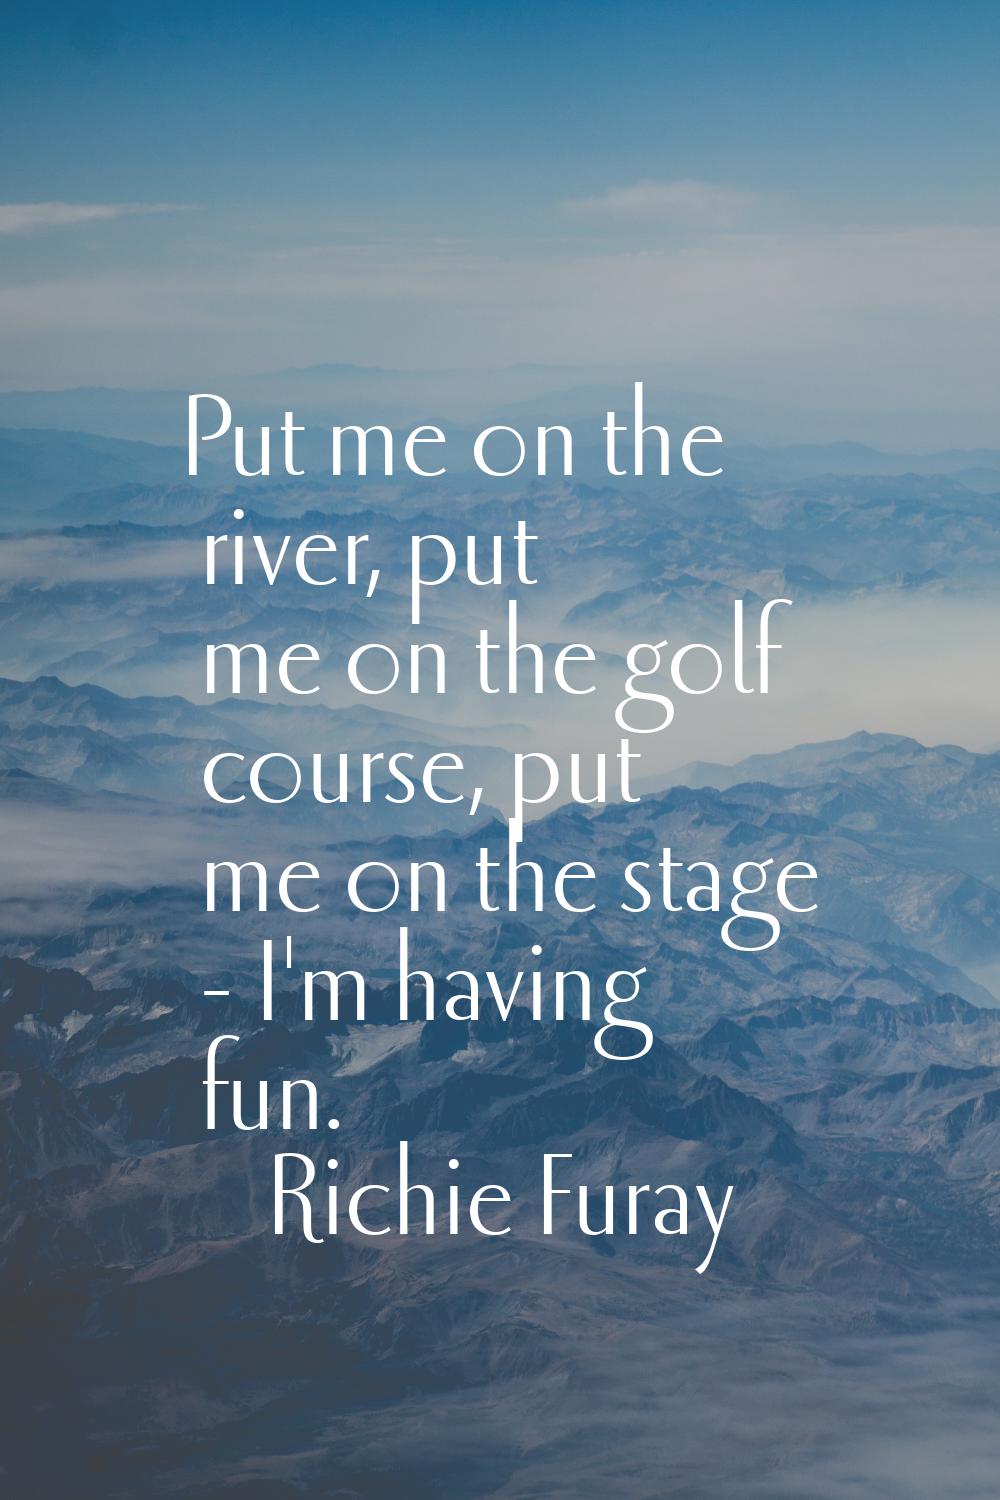 Put me on the river, put me on the golf course, put me on the stage - I'm having fun.